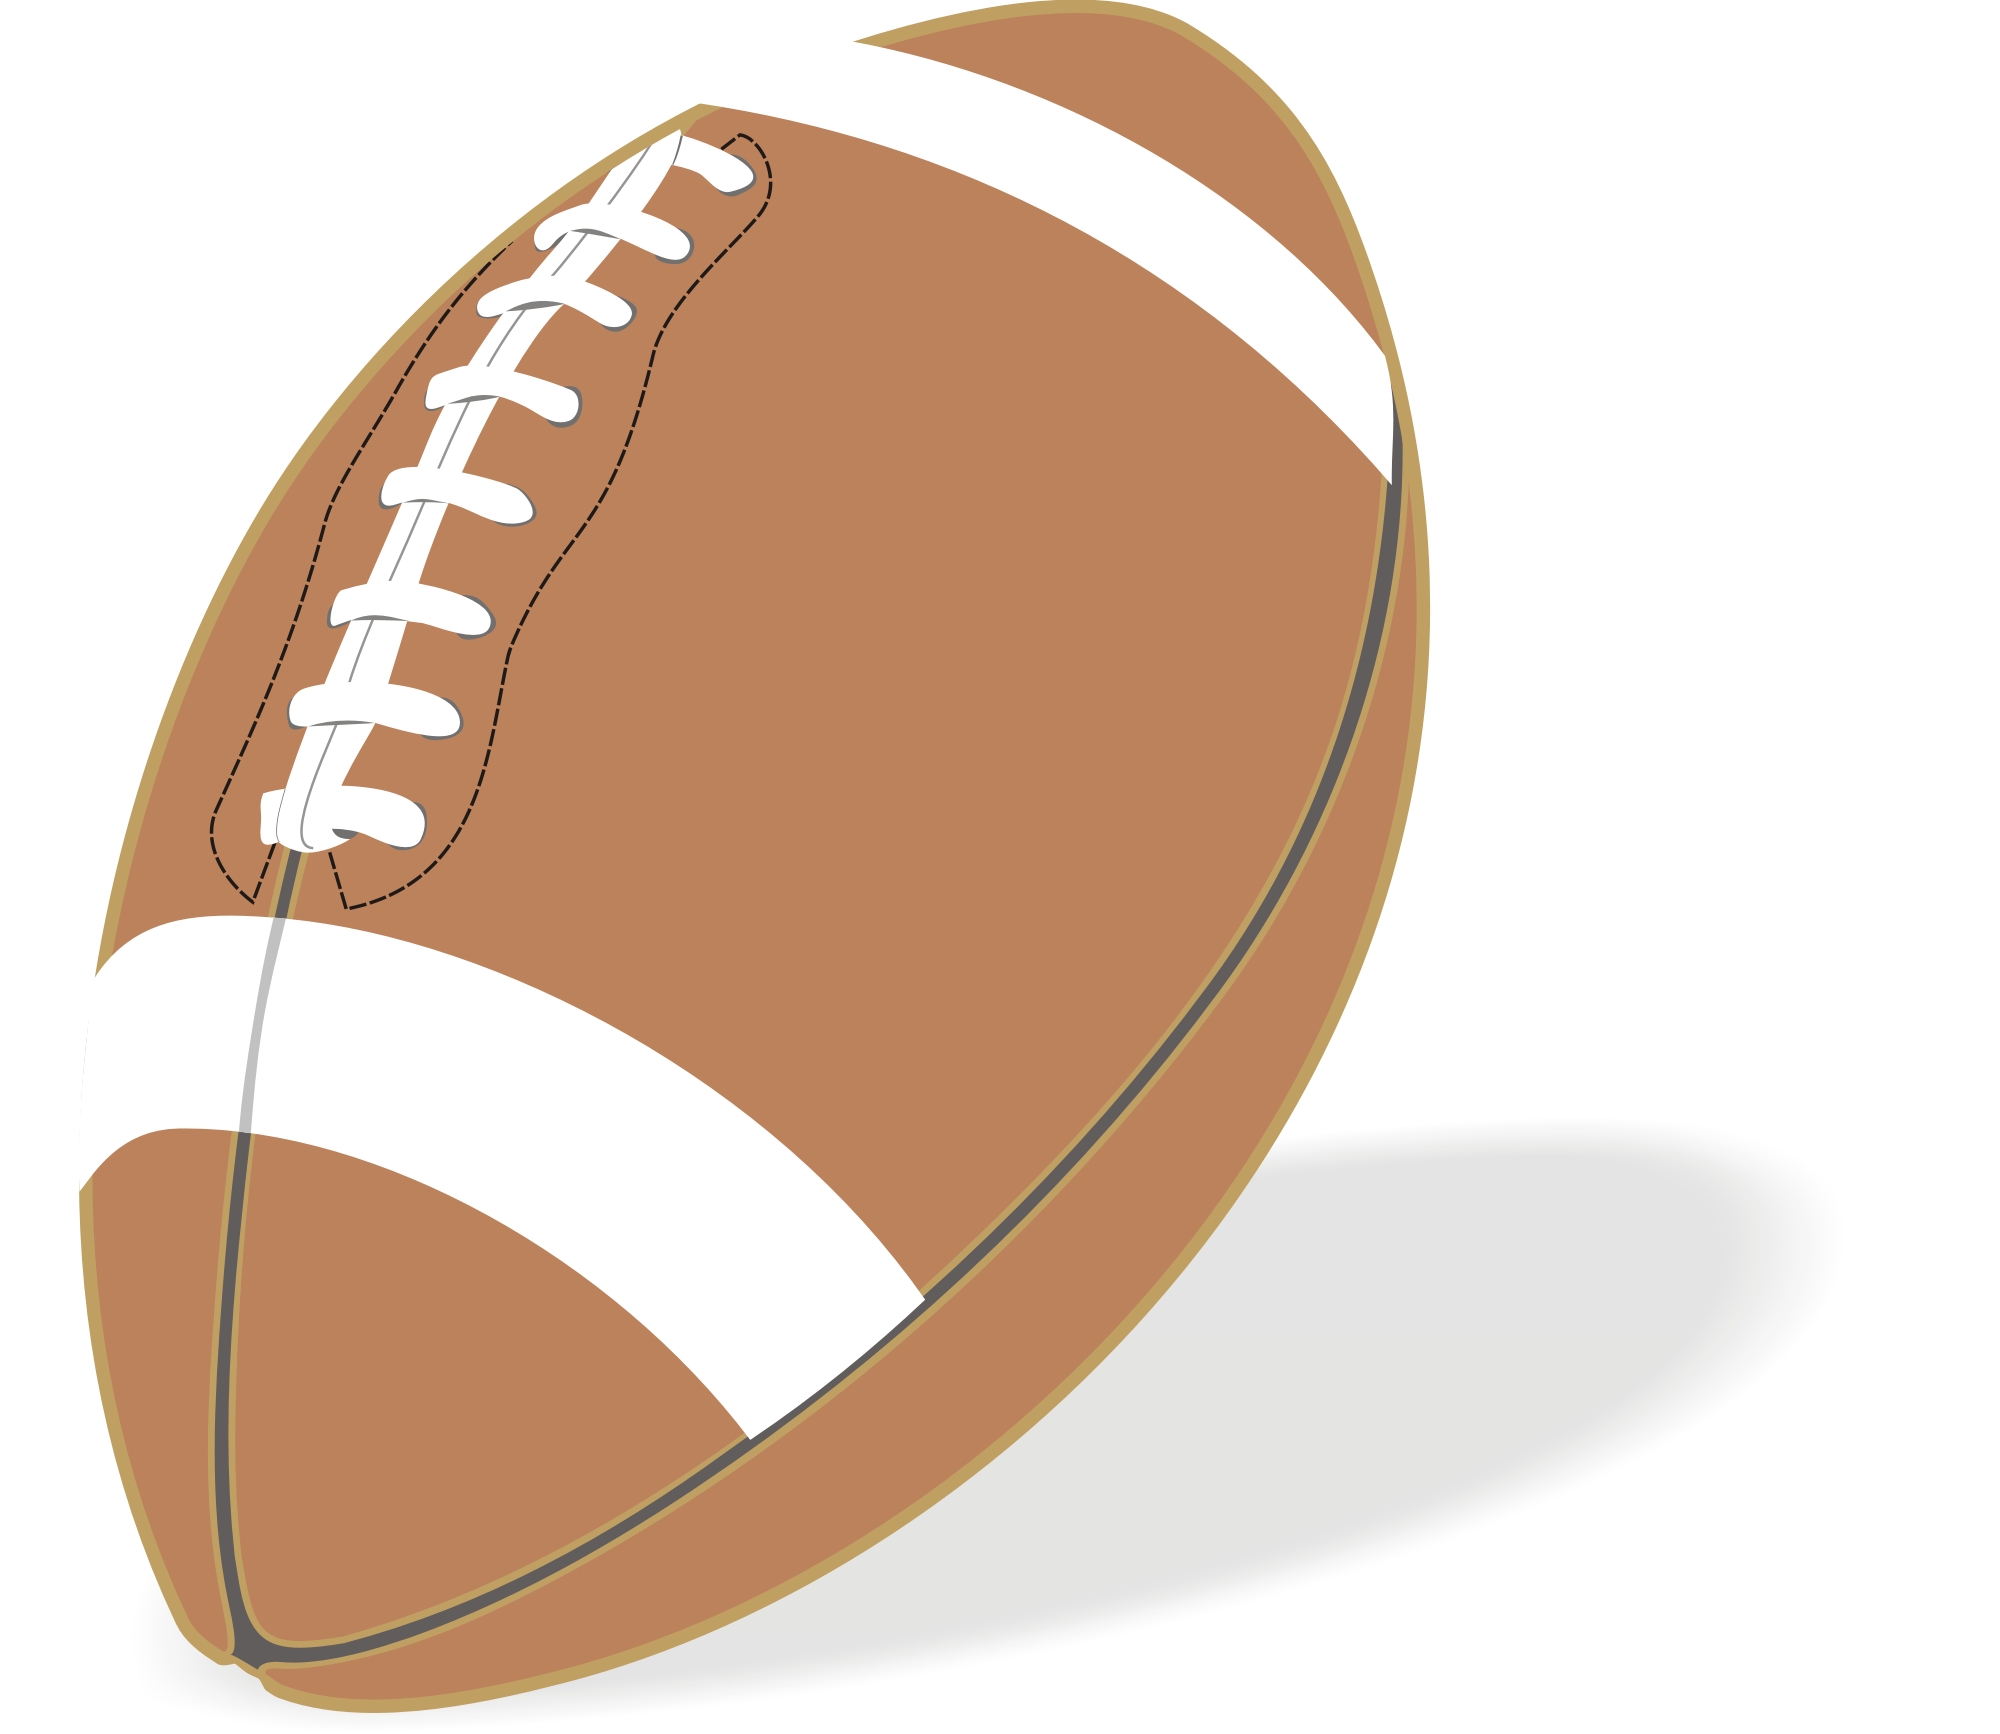 Free Picture Football, Download Free Clip Art, Free Clip Art.